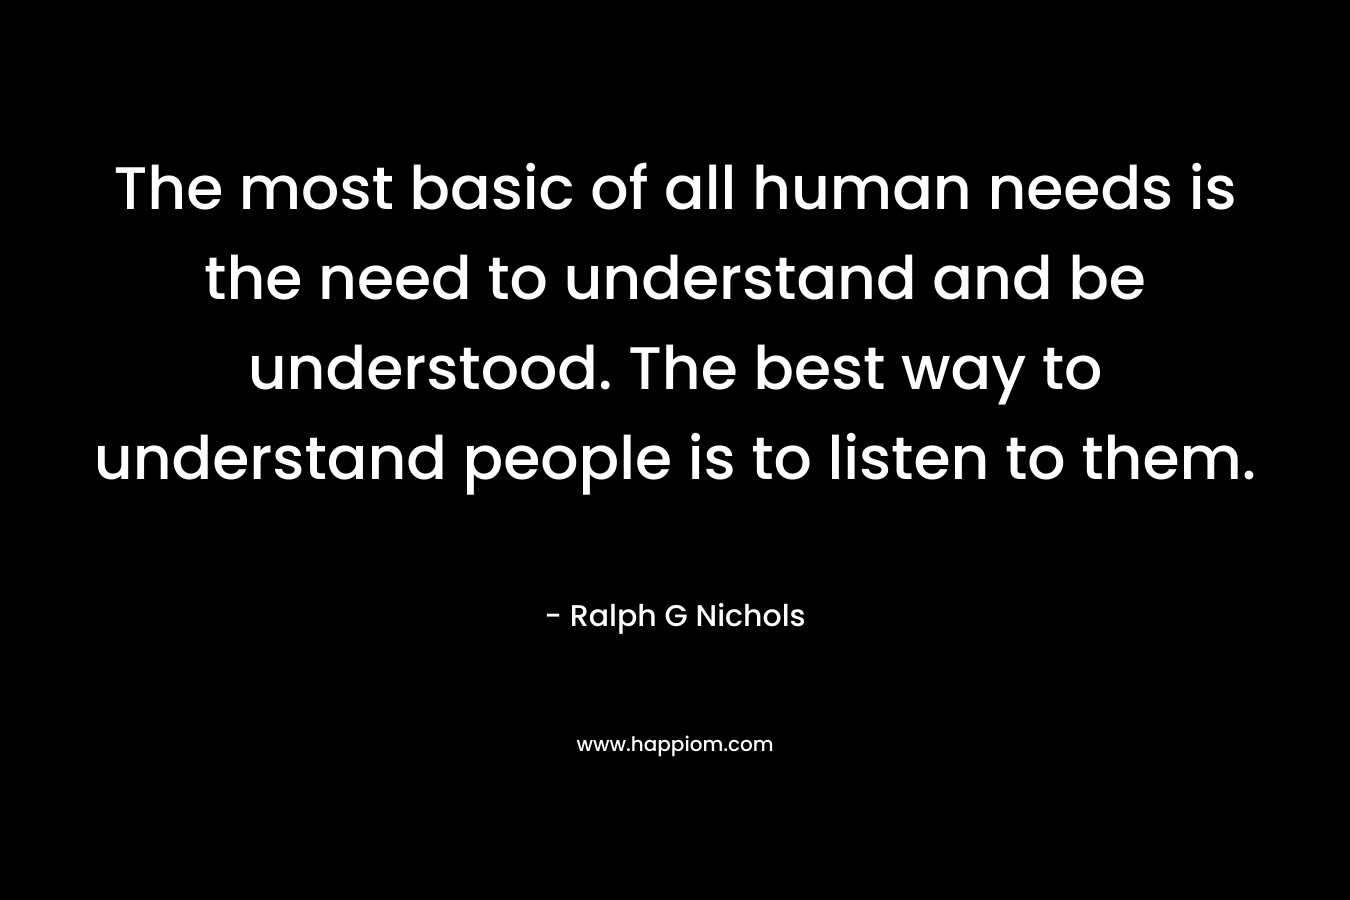 The most basic of all human needs is the need to understand and be understood. The best way to understand people is to listen to them.